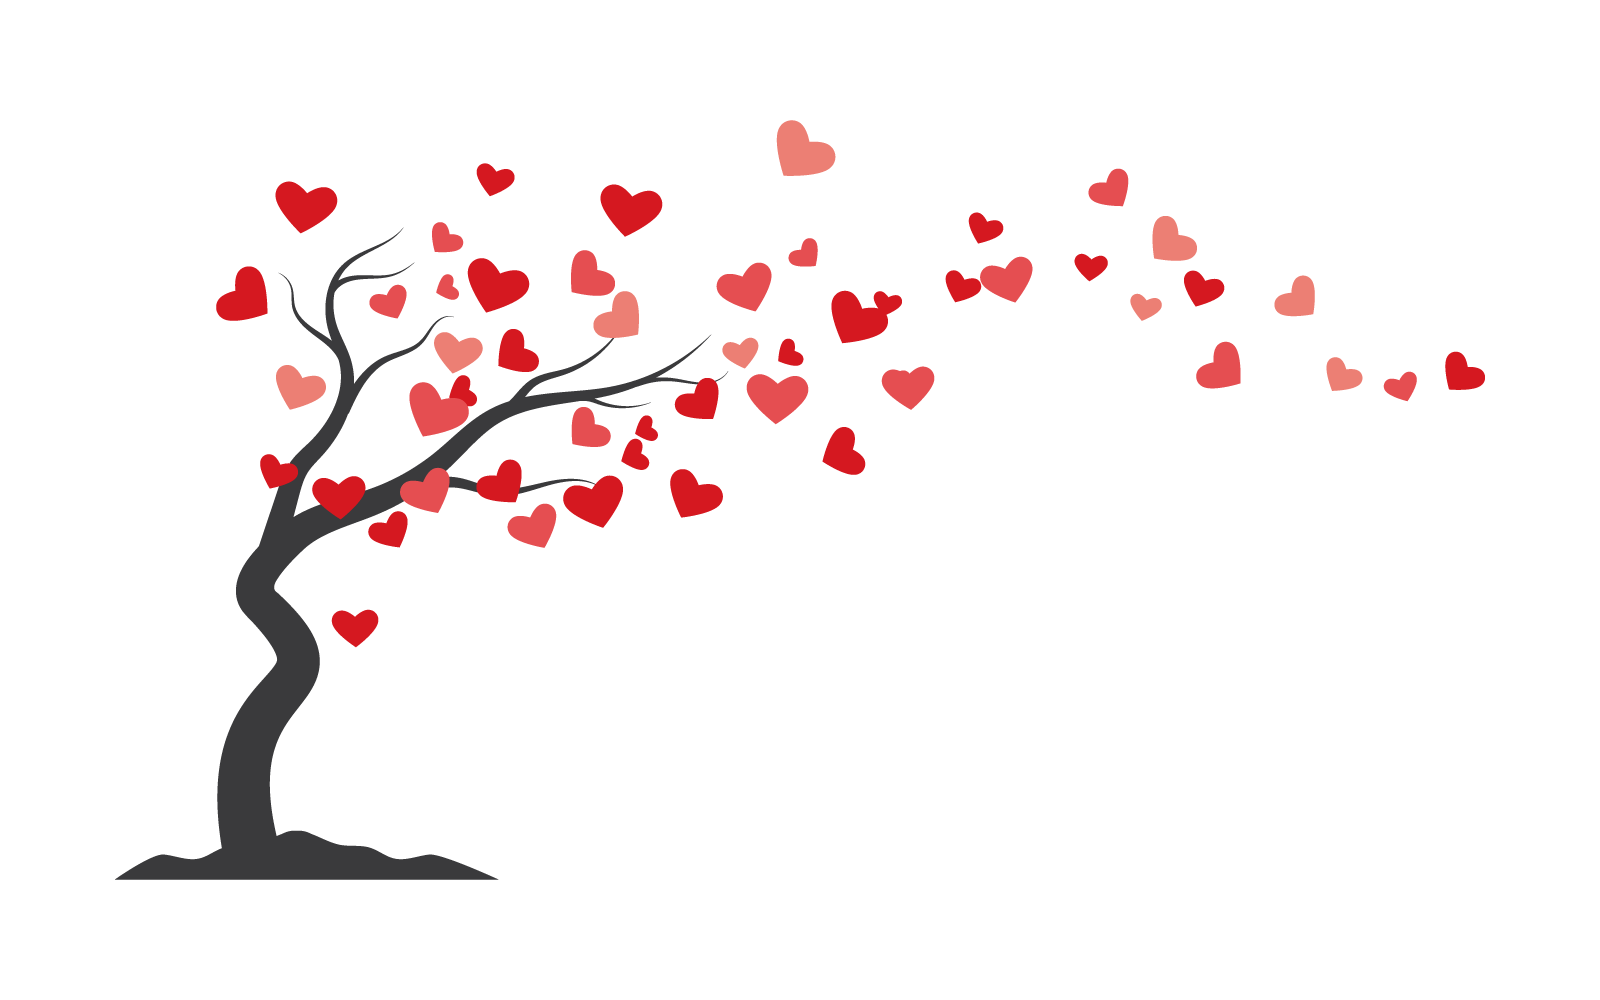 Tree Logo With Heart Leaves Vector Flat Design